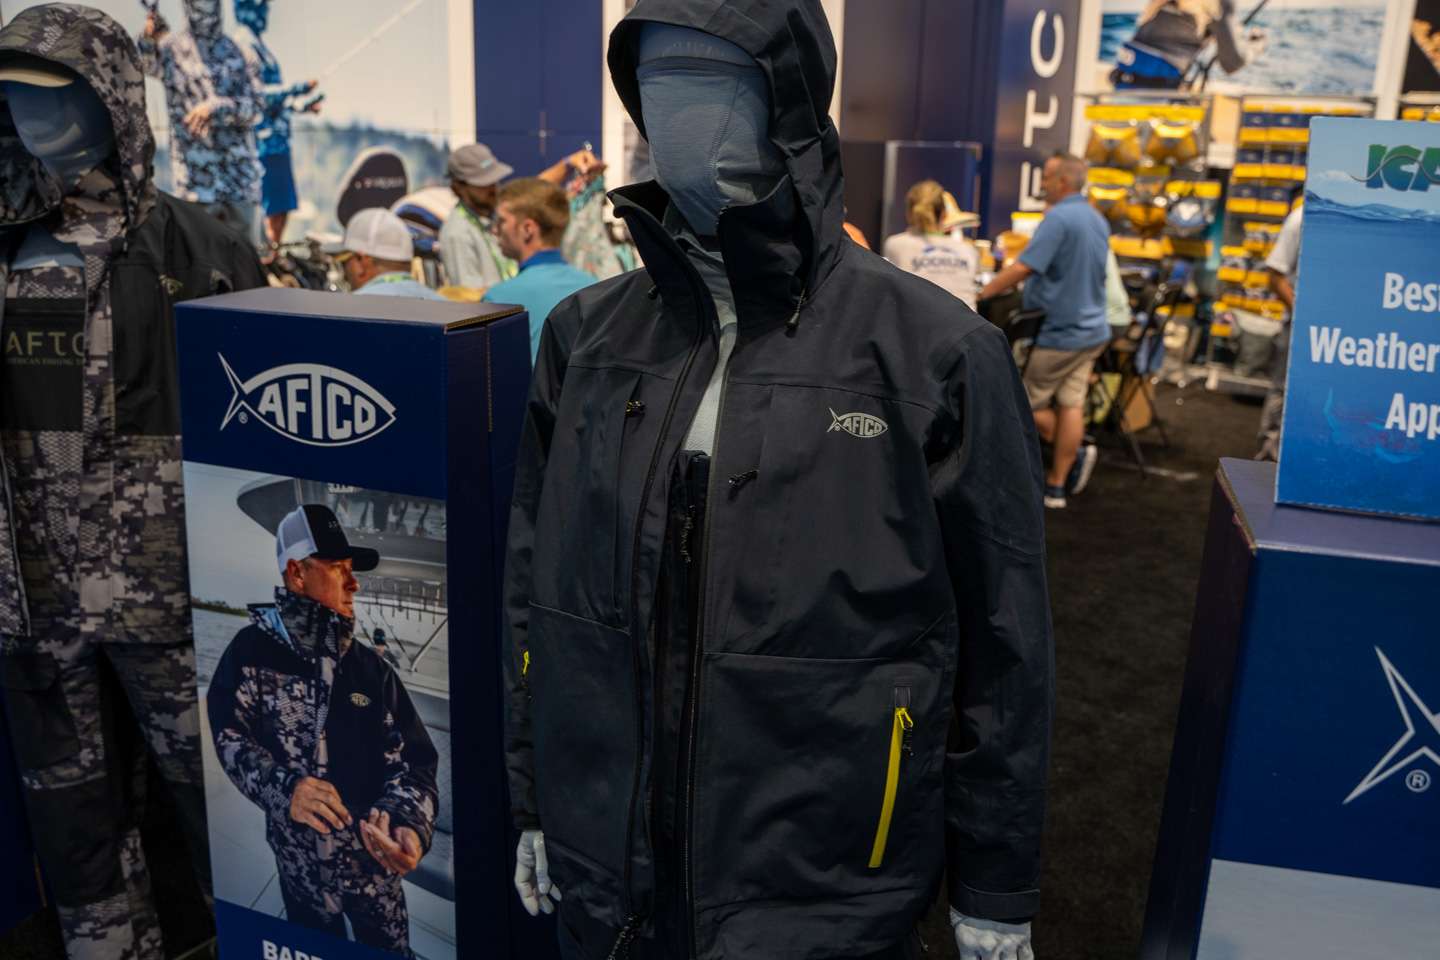 <b>AFTCO Barricade Elite 4-Layer Waterproof System</b><br>
The AFTCO Barricade Elite 4-Layer Waterproof System won the award for Best Cold Weather Technical Apparel. AFTCOâs flagship cold weather gear will keep you warm and dry under the harshest conditions. 